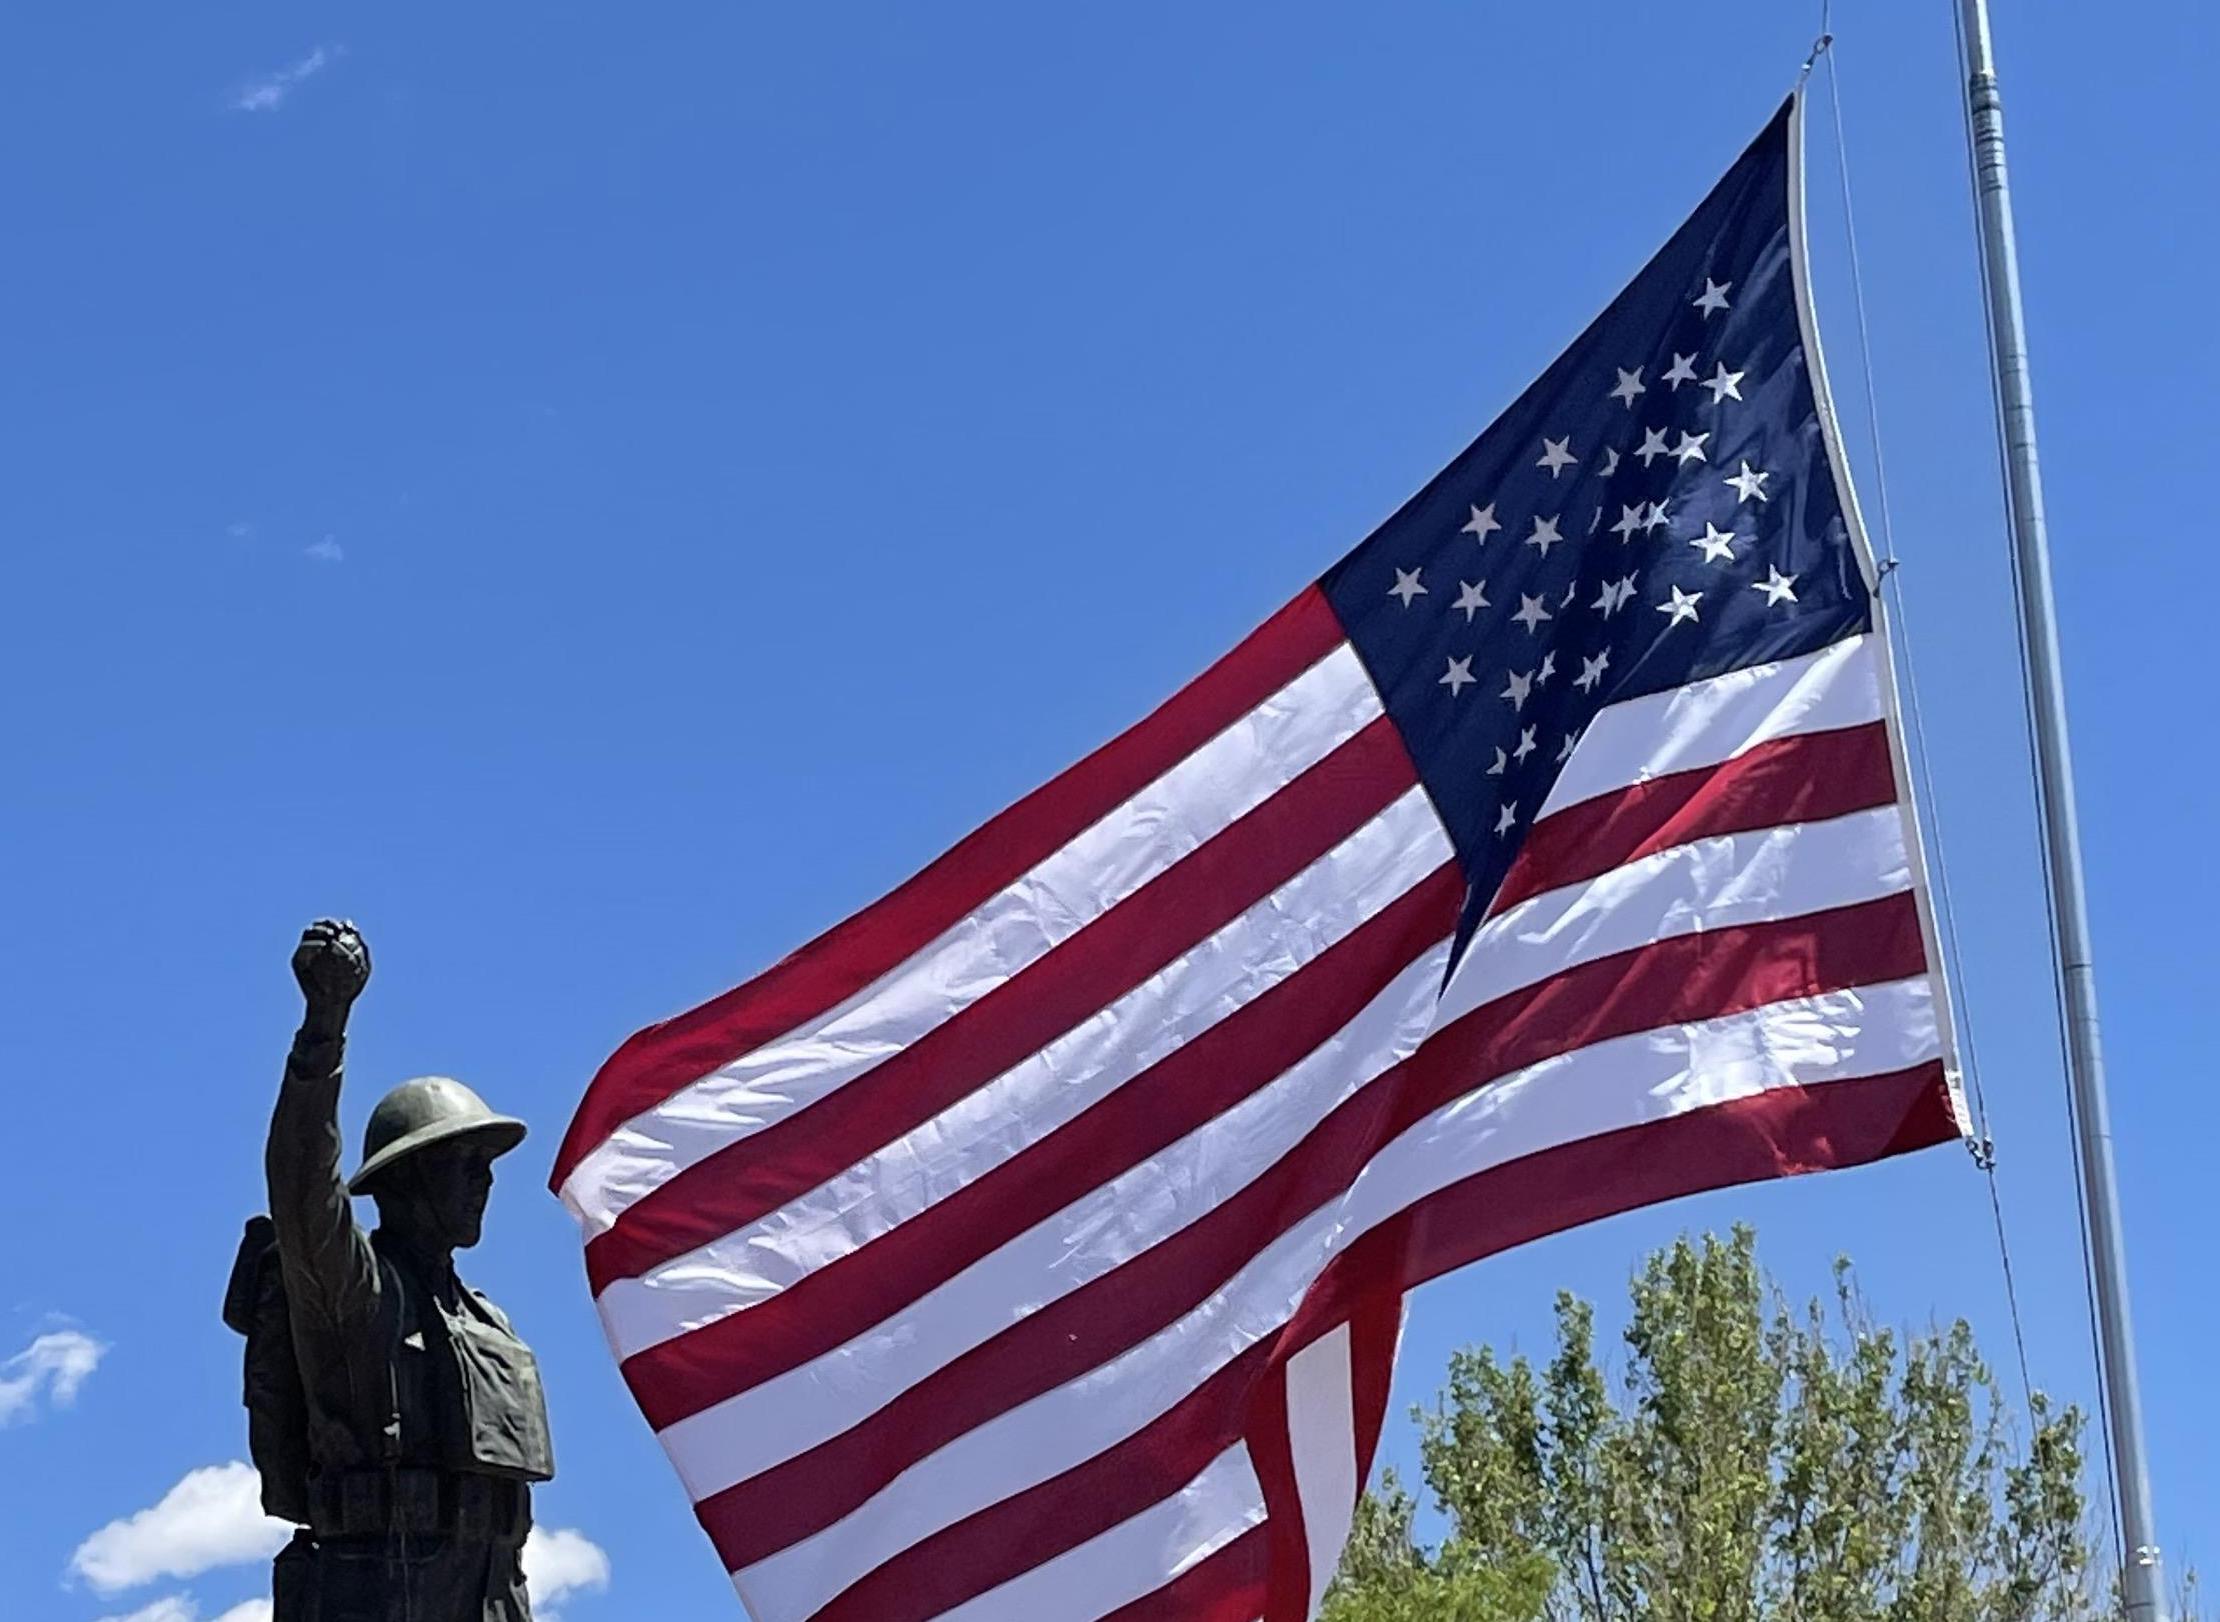 Honoring Old Glory on Flag Day